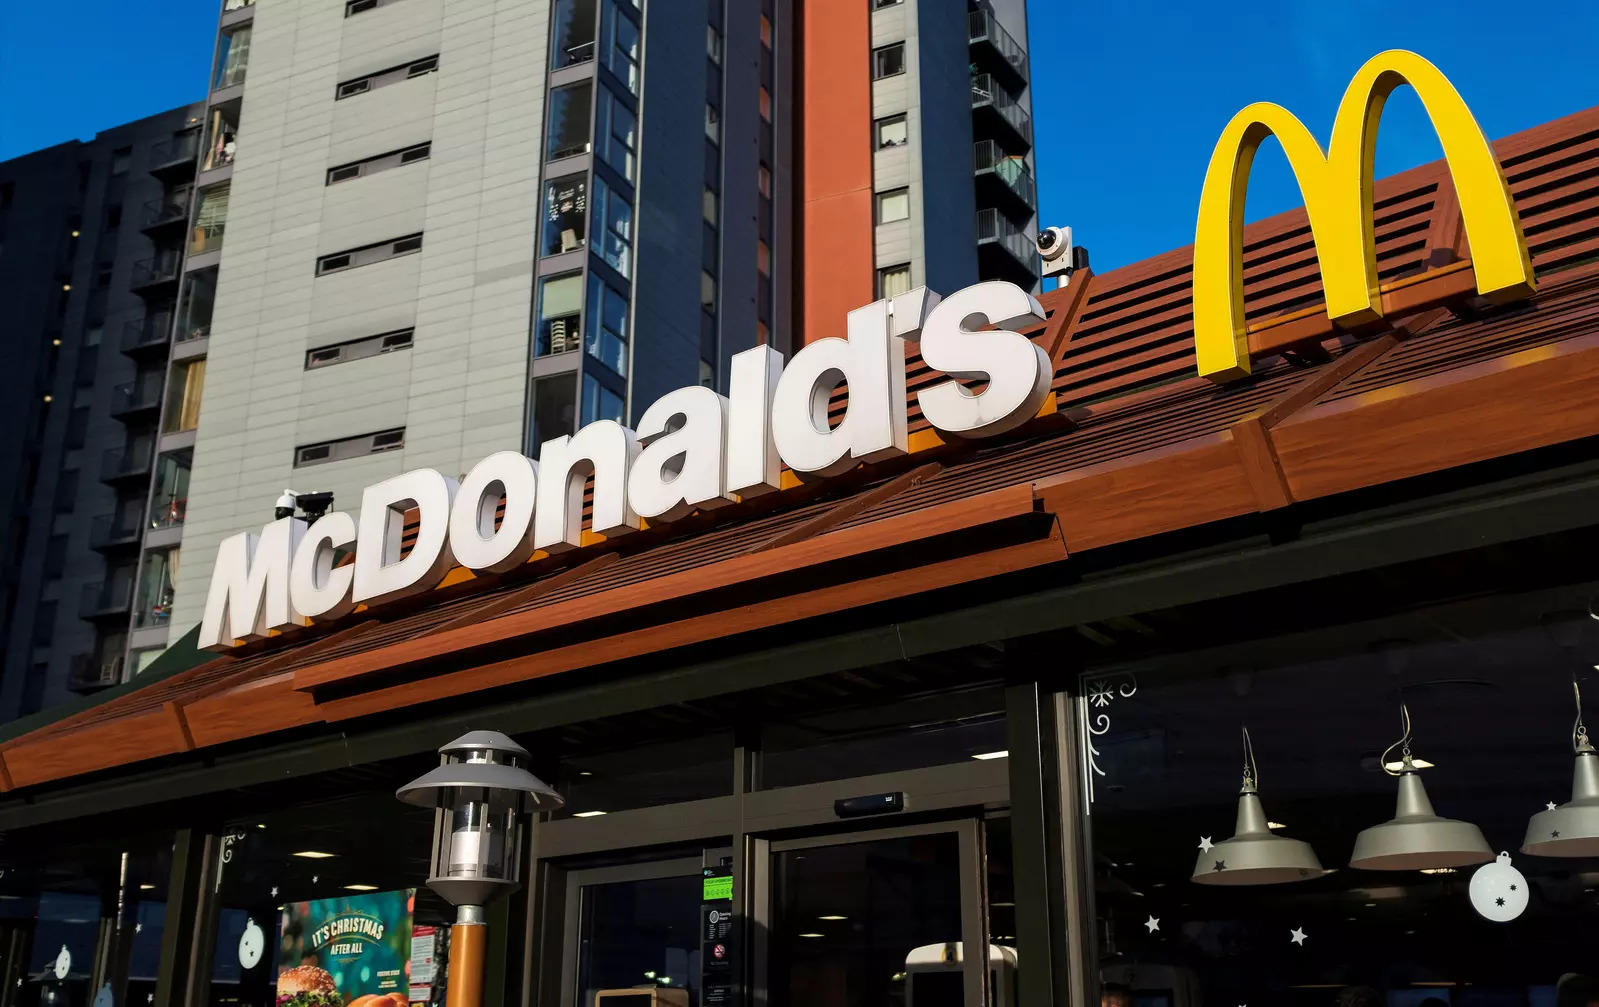 Westlife eyes almost 3-fold sales growth in next 5 years, to add 300 McDonald's restaurants by 2027